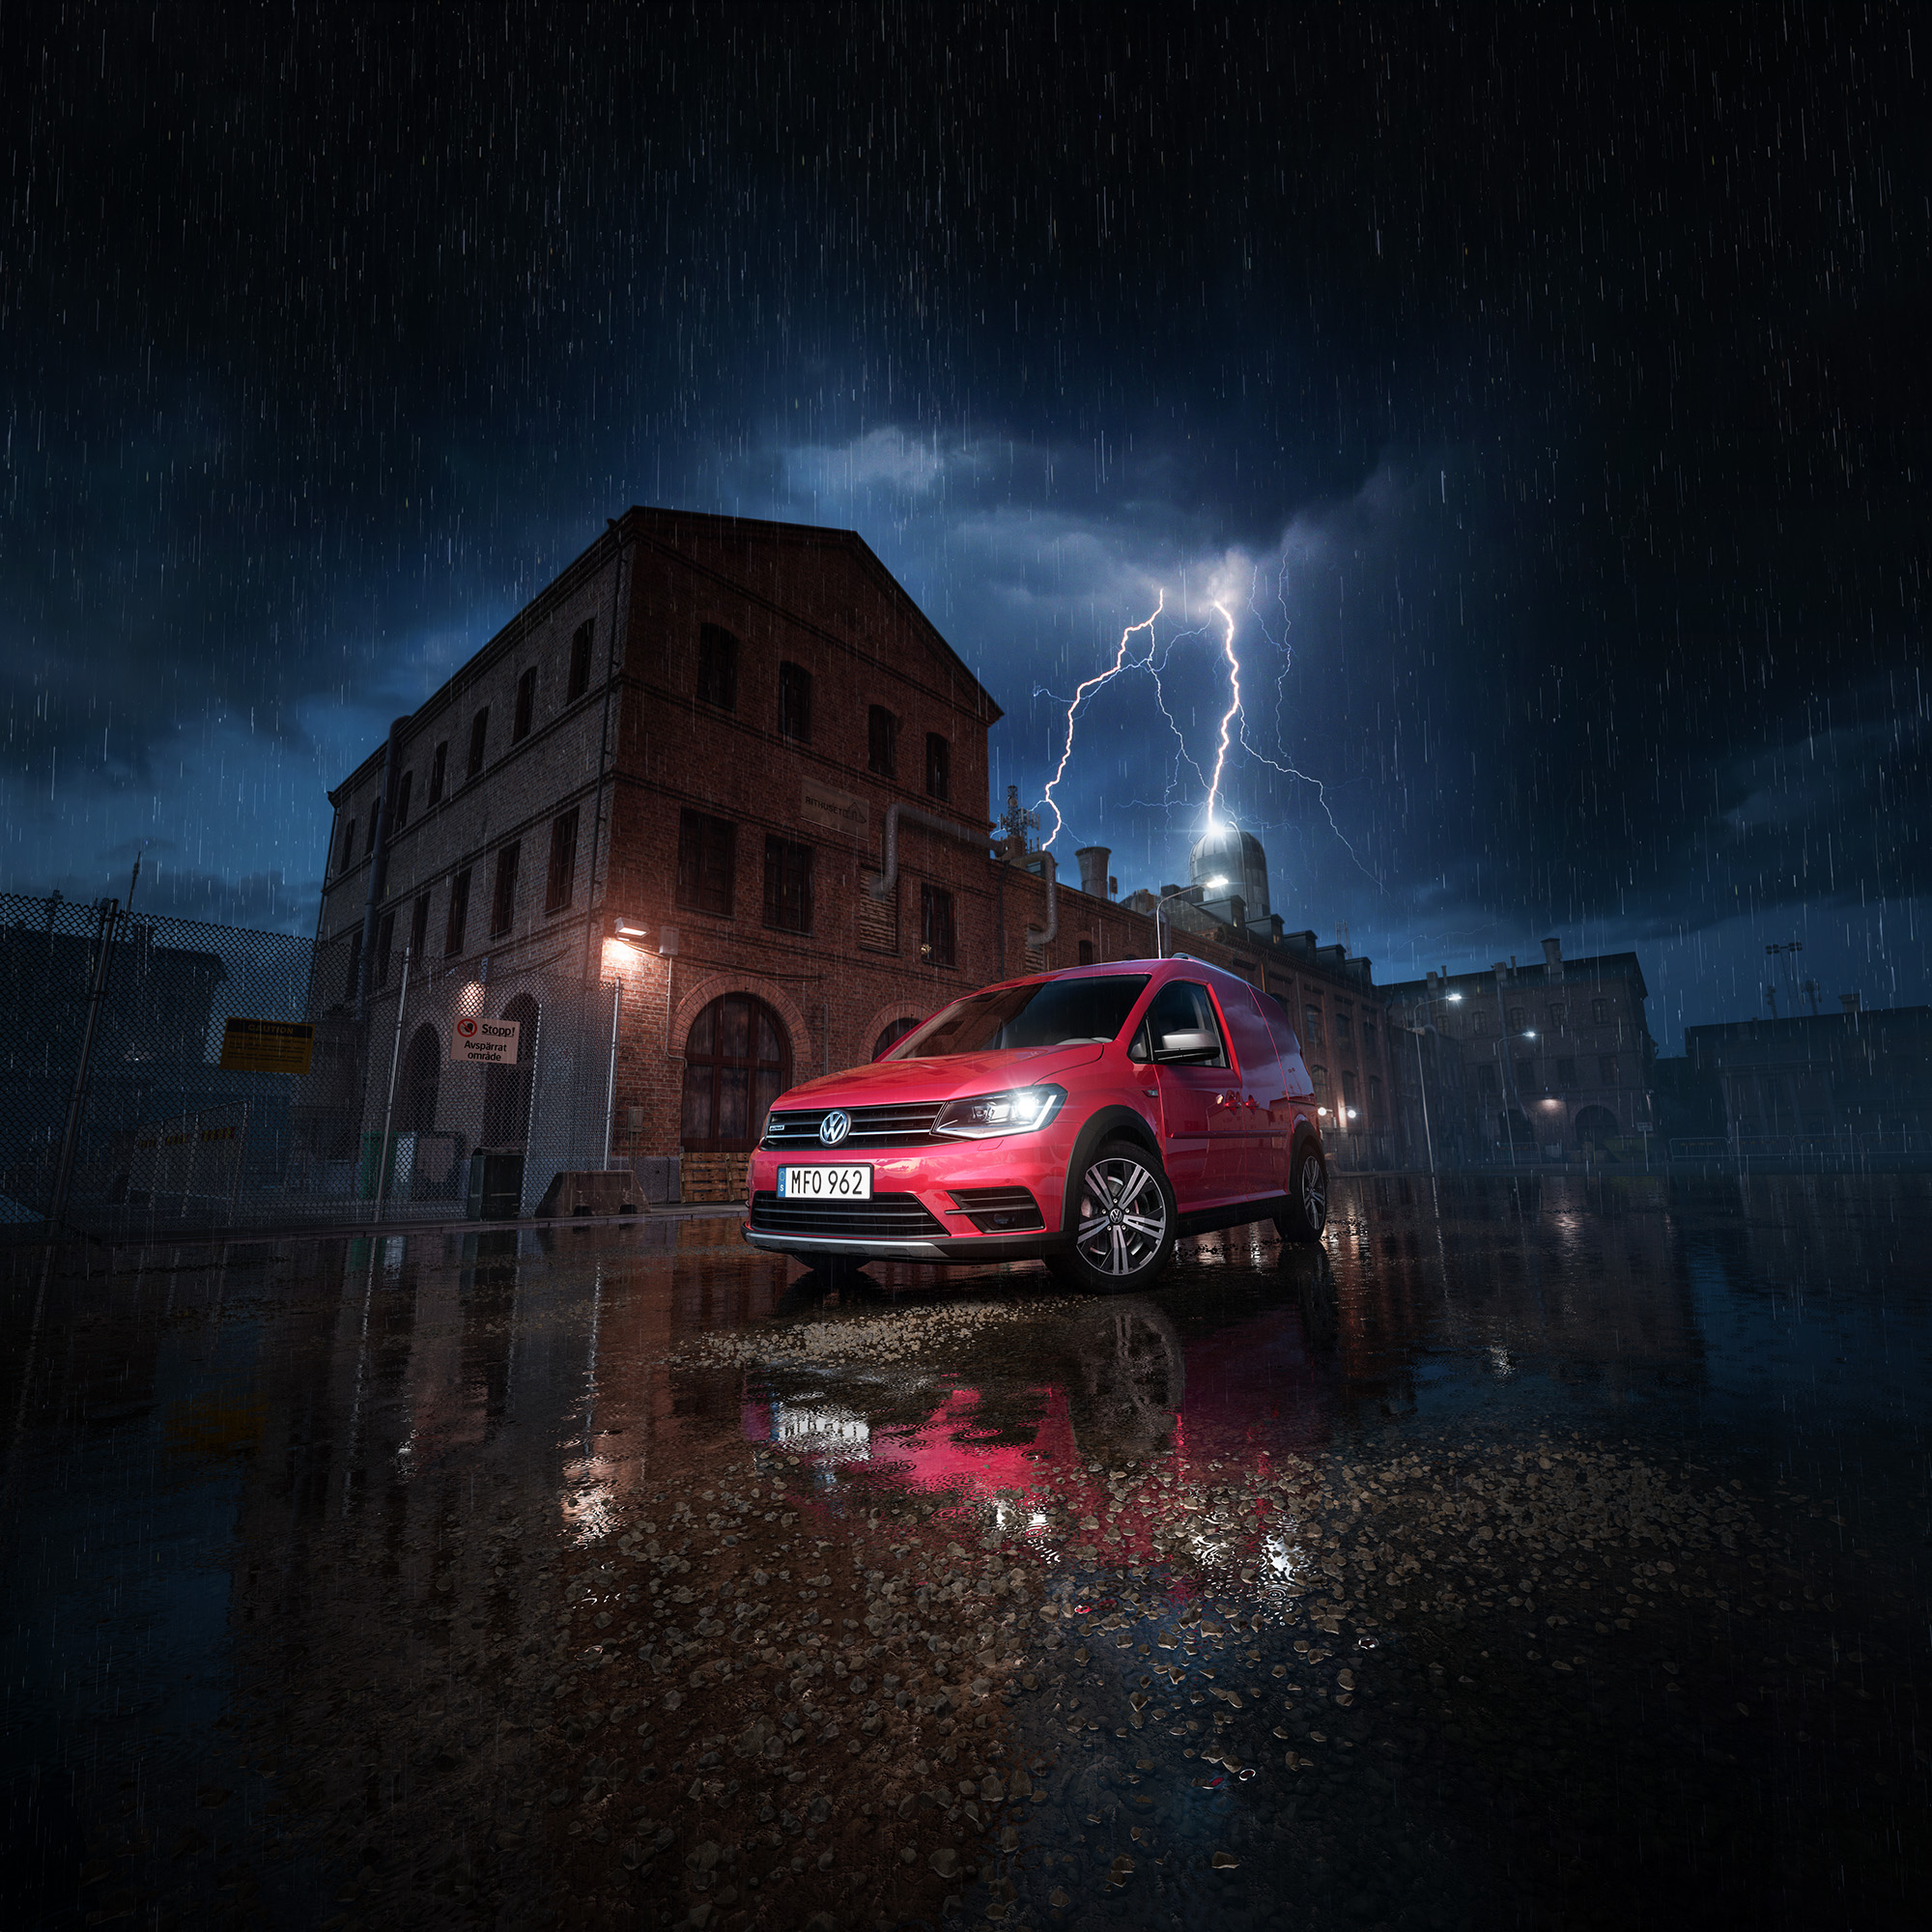 Volkswagen Caddy everything rack car in the industrial area of thunderstorms and rain